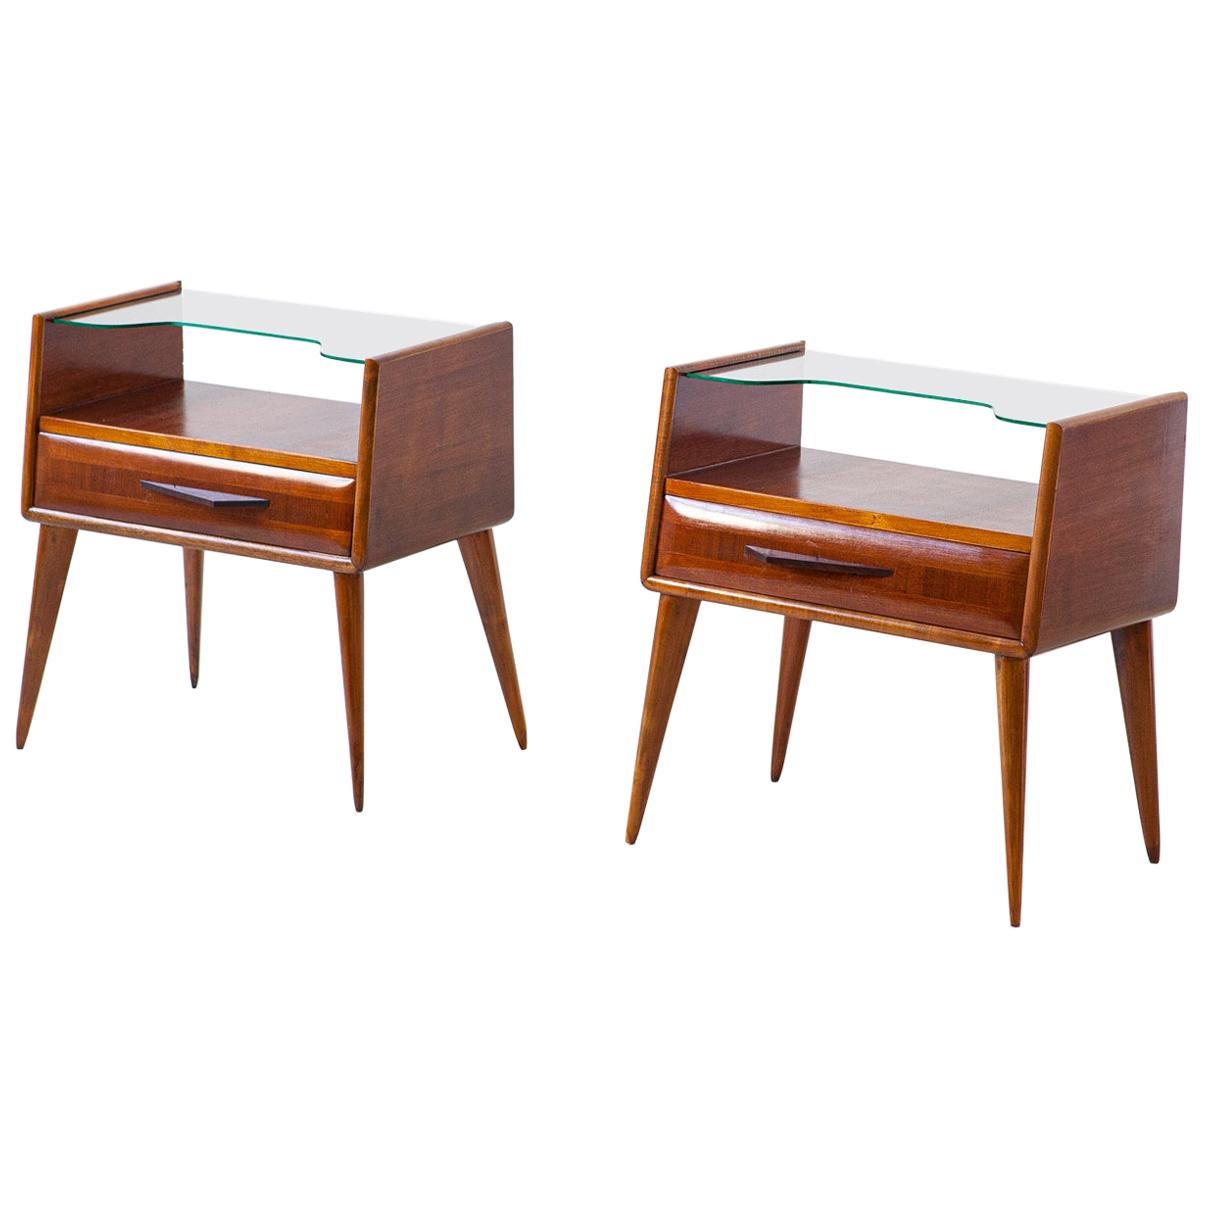 1950s Italian Wooden Bedside Tables with Glass Top